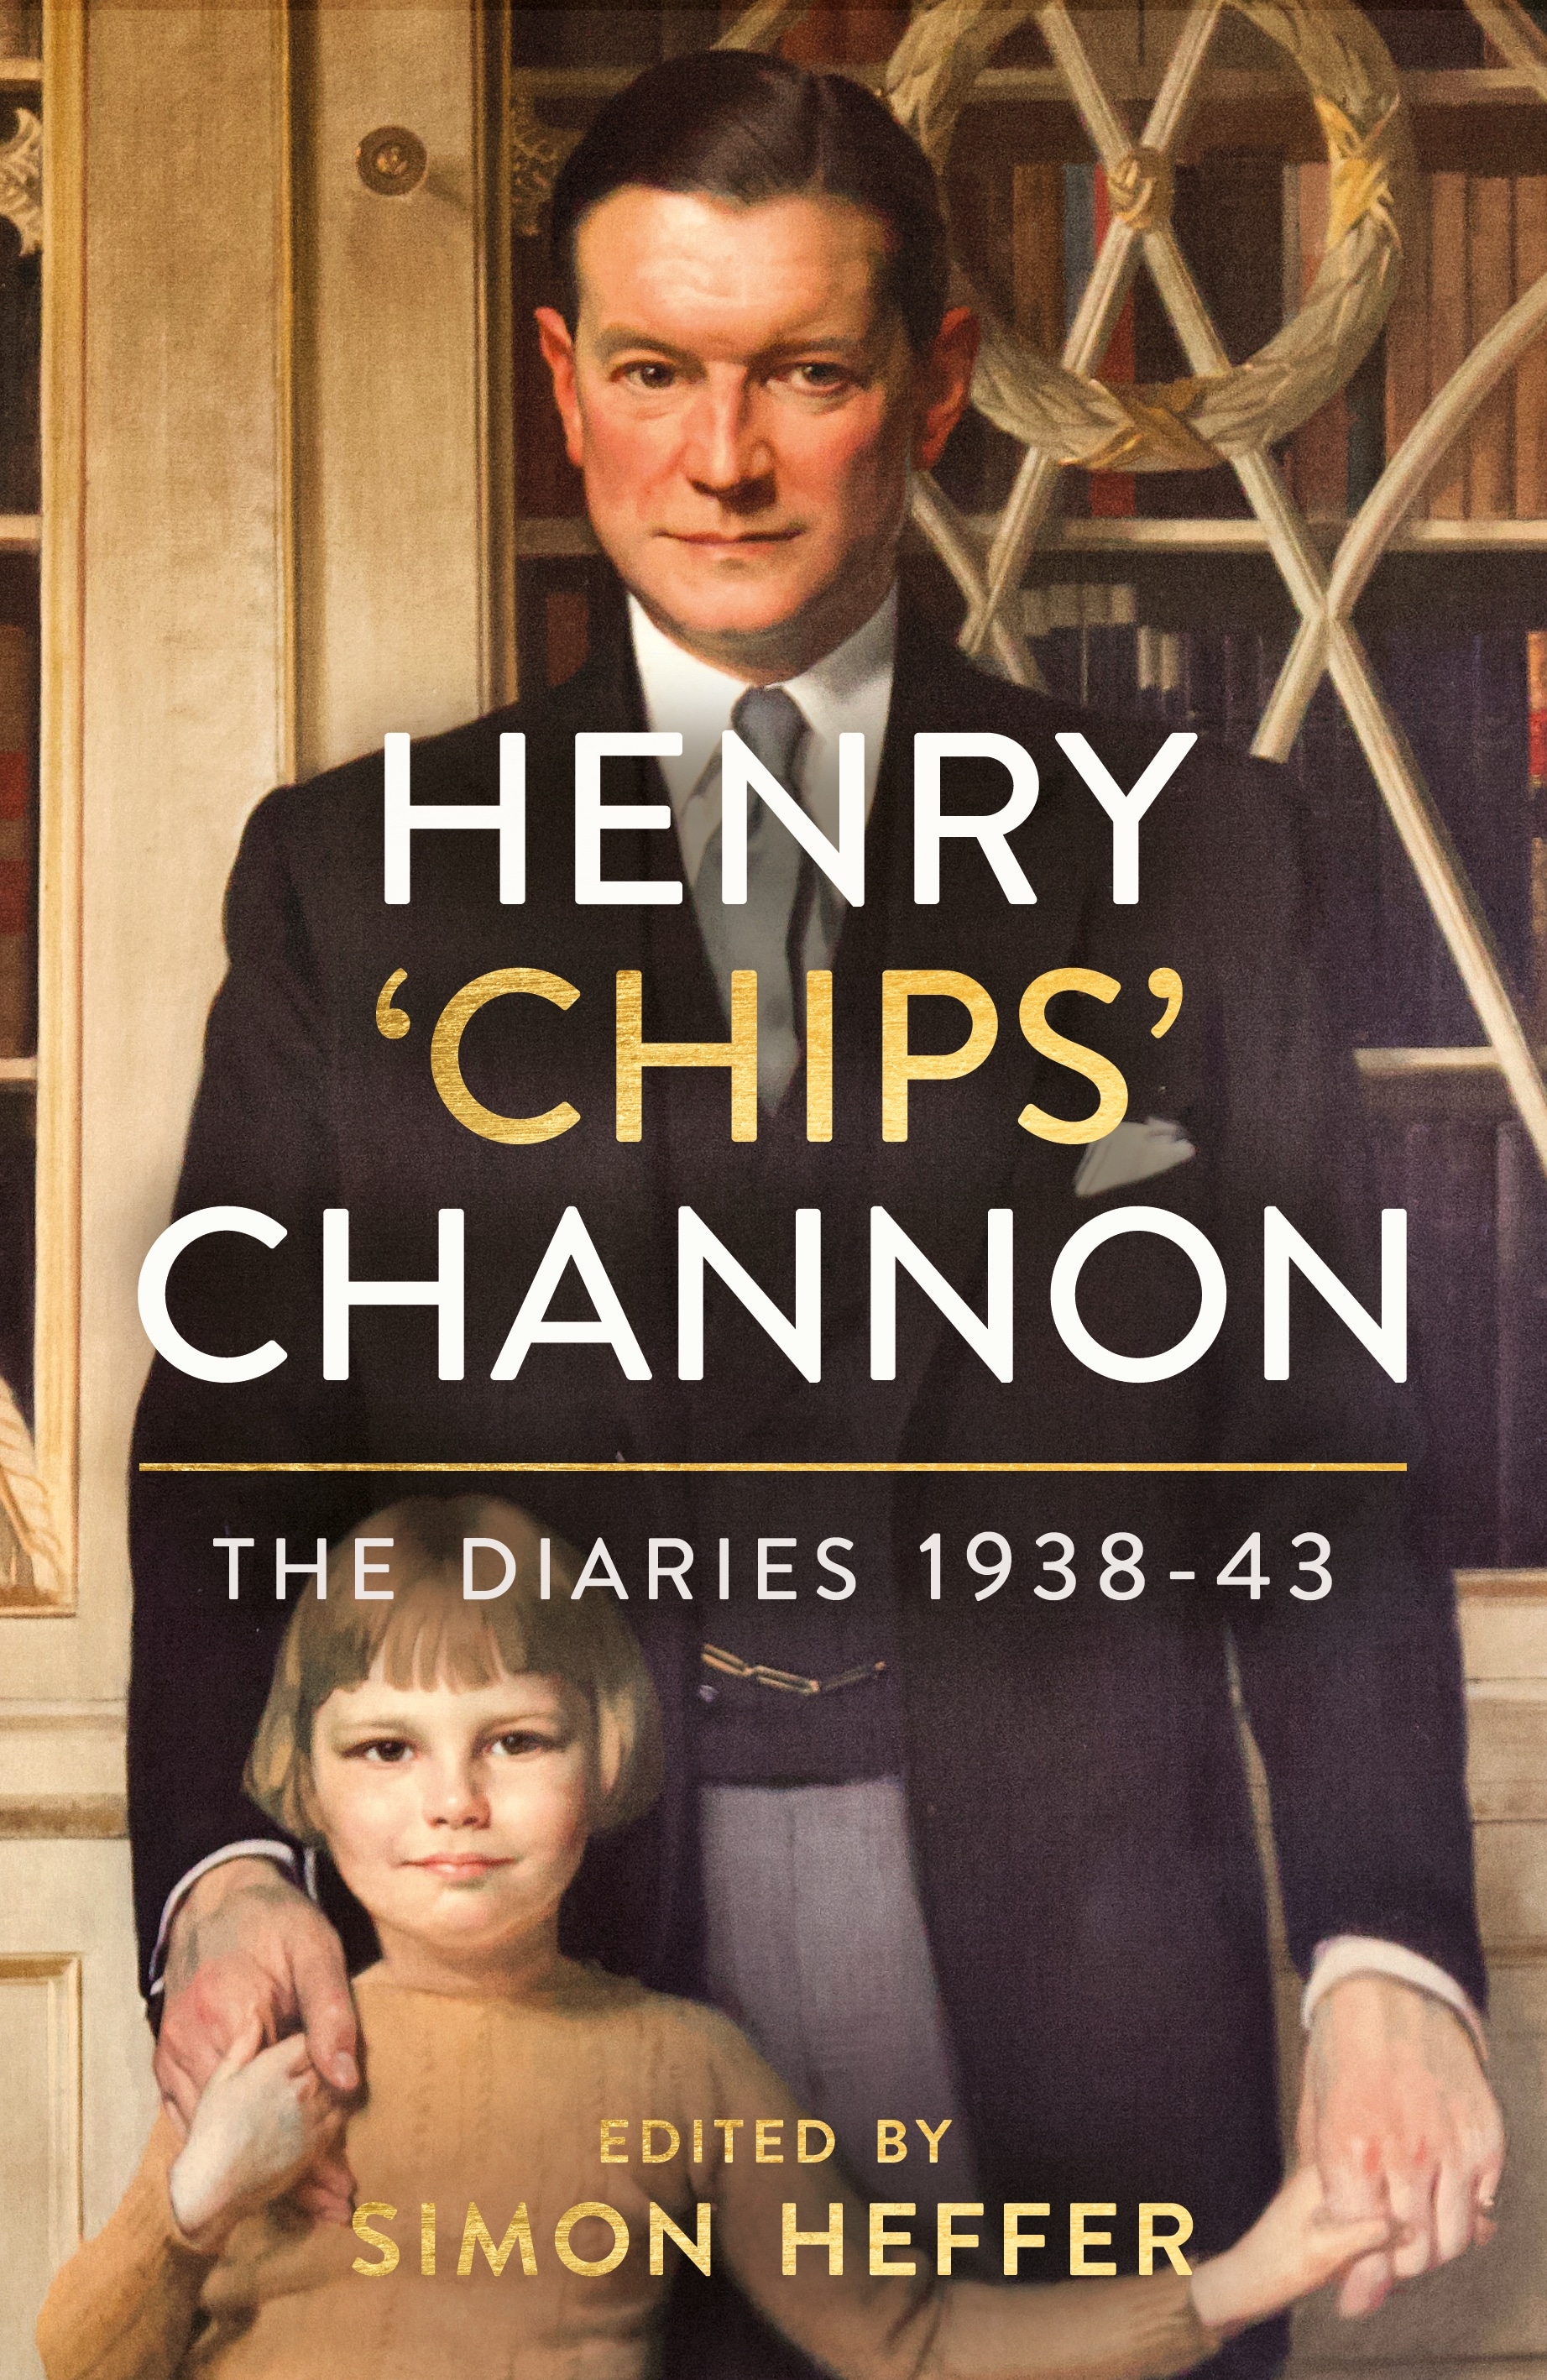 Book “Henry ‘Chips’ Channon: The Diaries (Volume 2)” by Chips Channon — September 9, 2021